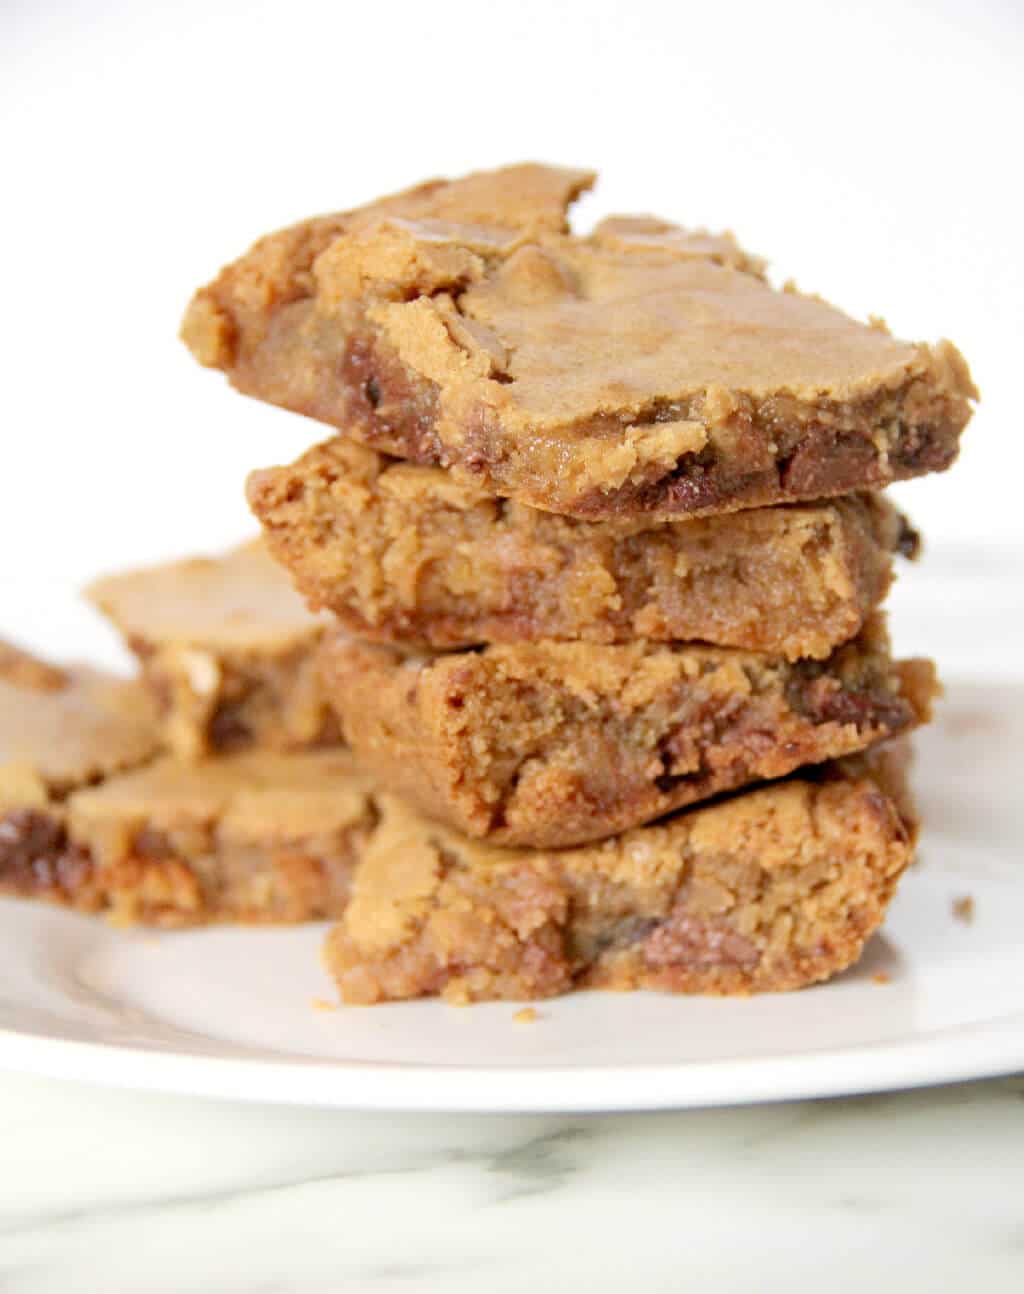 Blondies Recipe--add chocolate chips, nuts, toffee, dried fruit--endless possibilities!